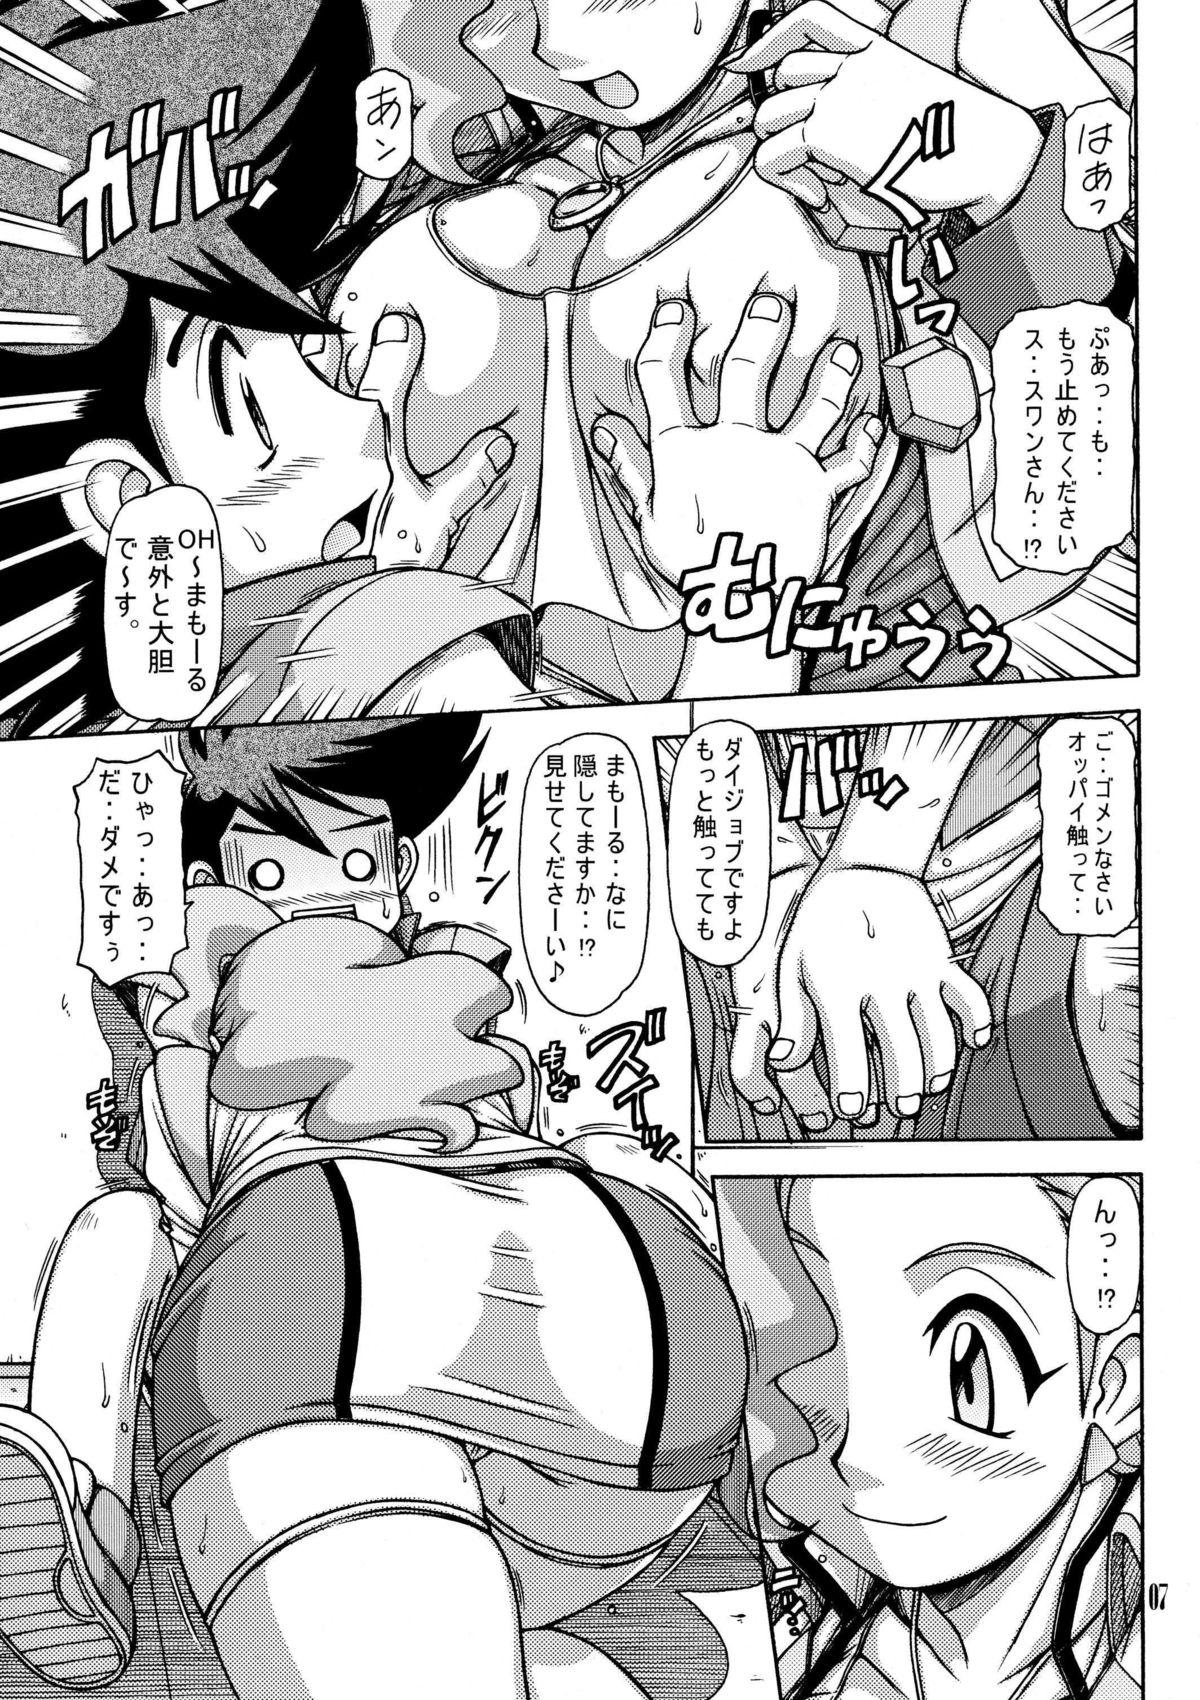 Pussy Eating Red Muffler GGG - Gaogaigar Nurse - Page 6